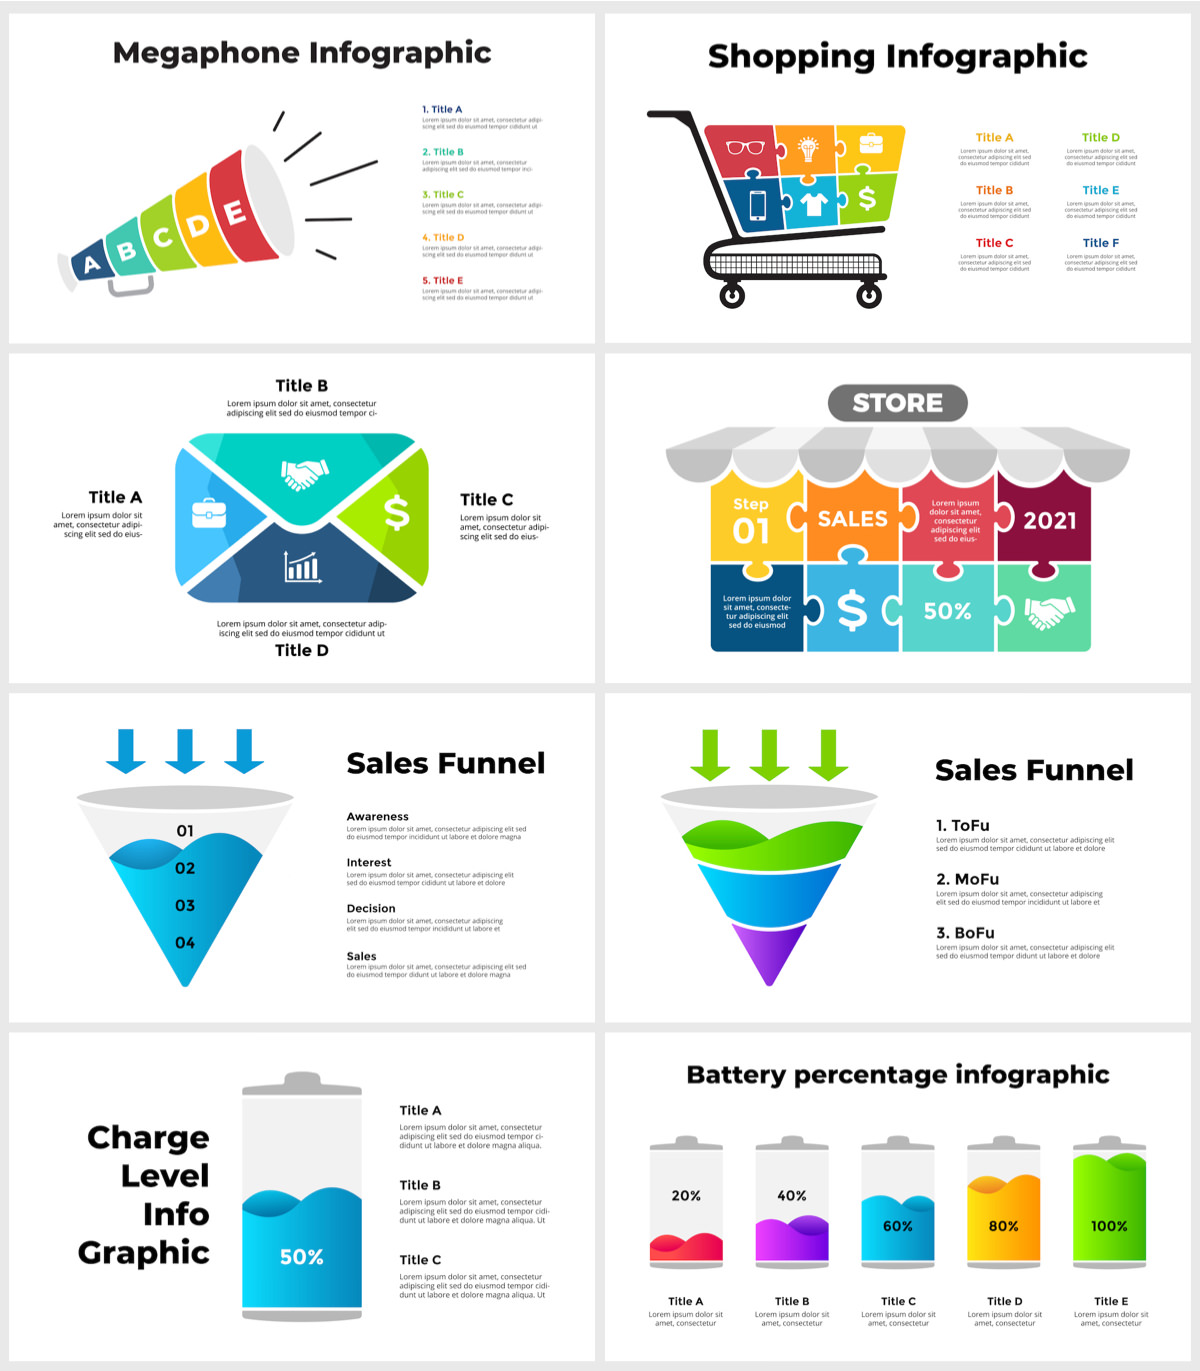 Wowly - 3500 Infographics & Presentation Templates! Updated! PowerPoint Canva Figma Sketch Ai Psd. - 177